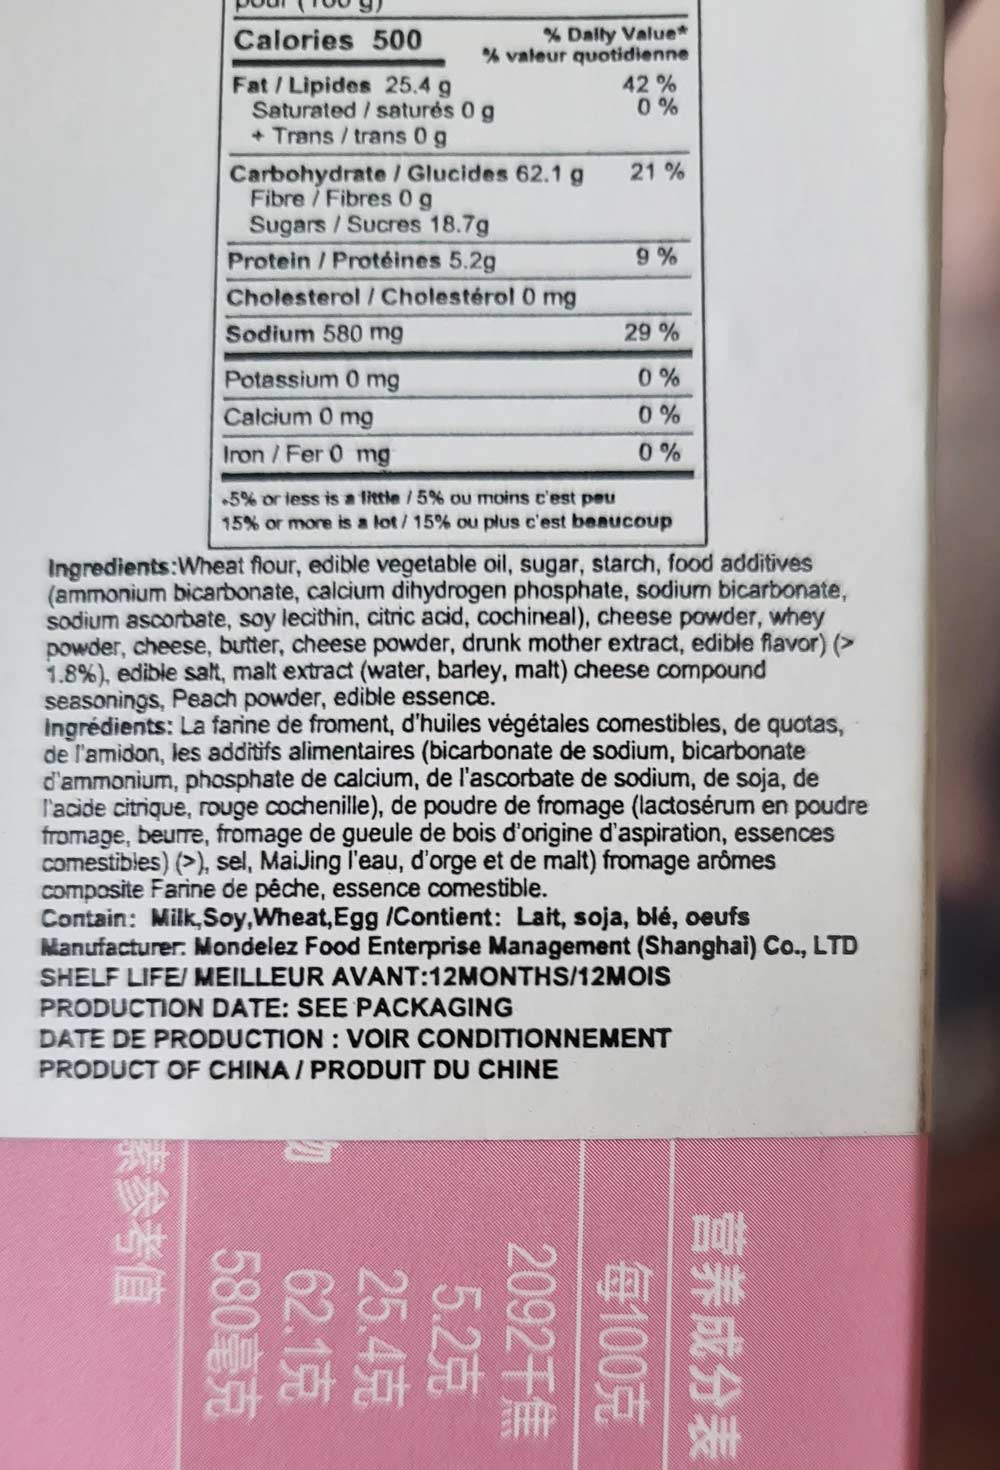 Never thought I'd see an ingredient called "drunk mother extract"